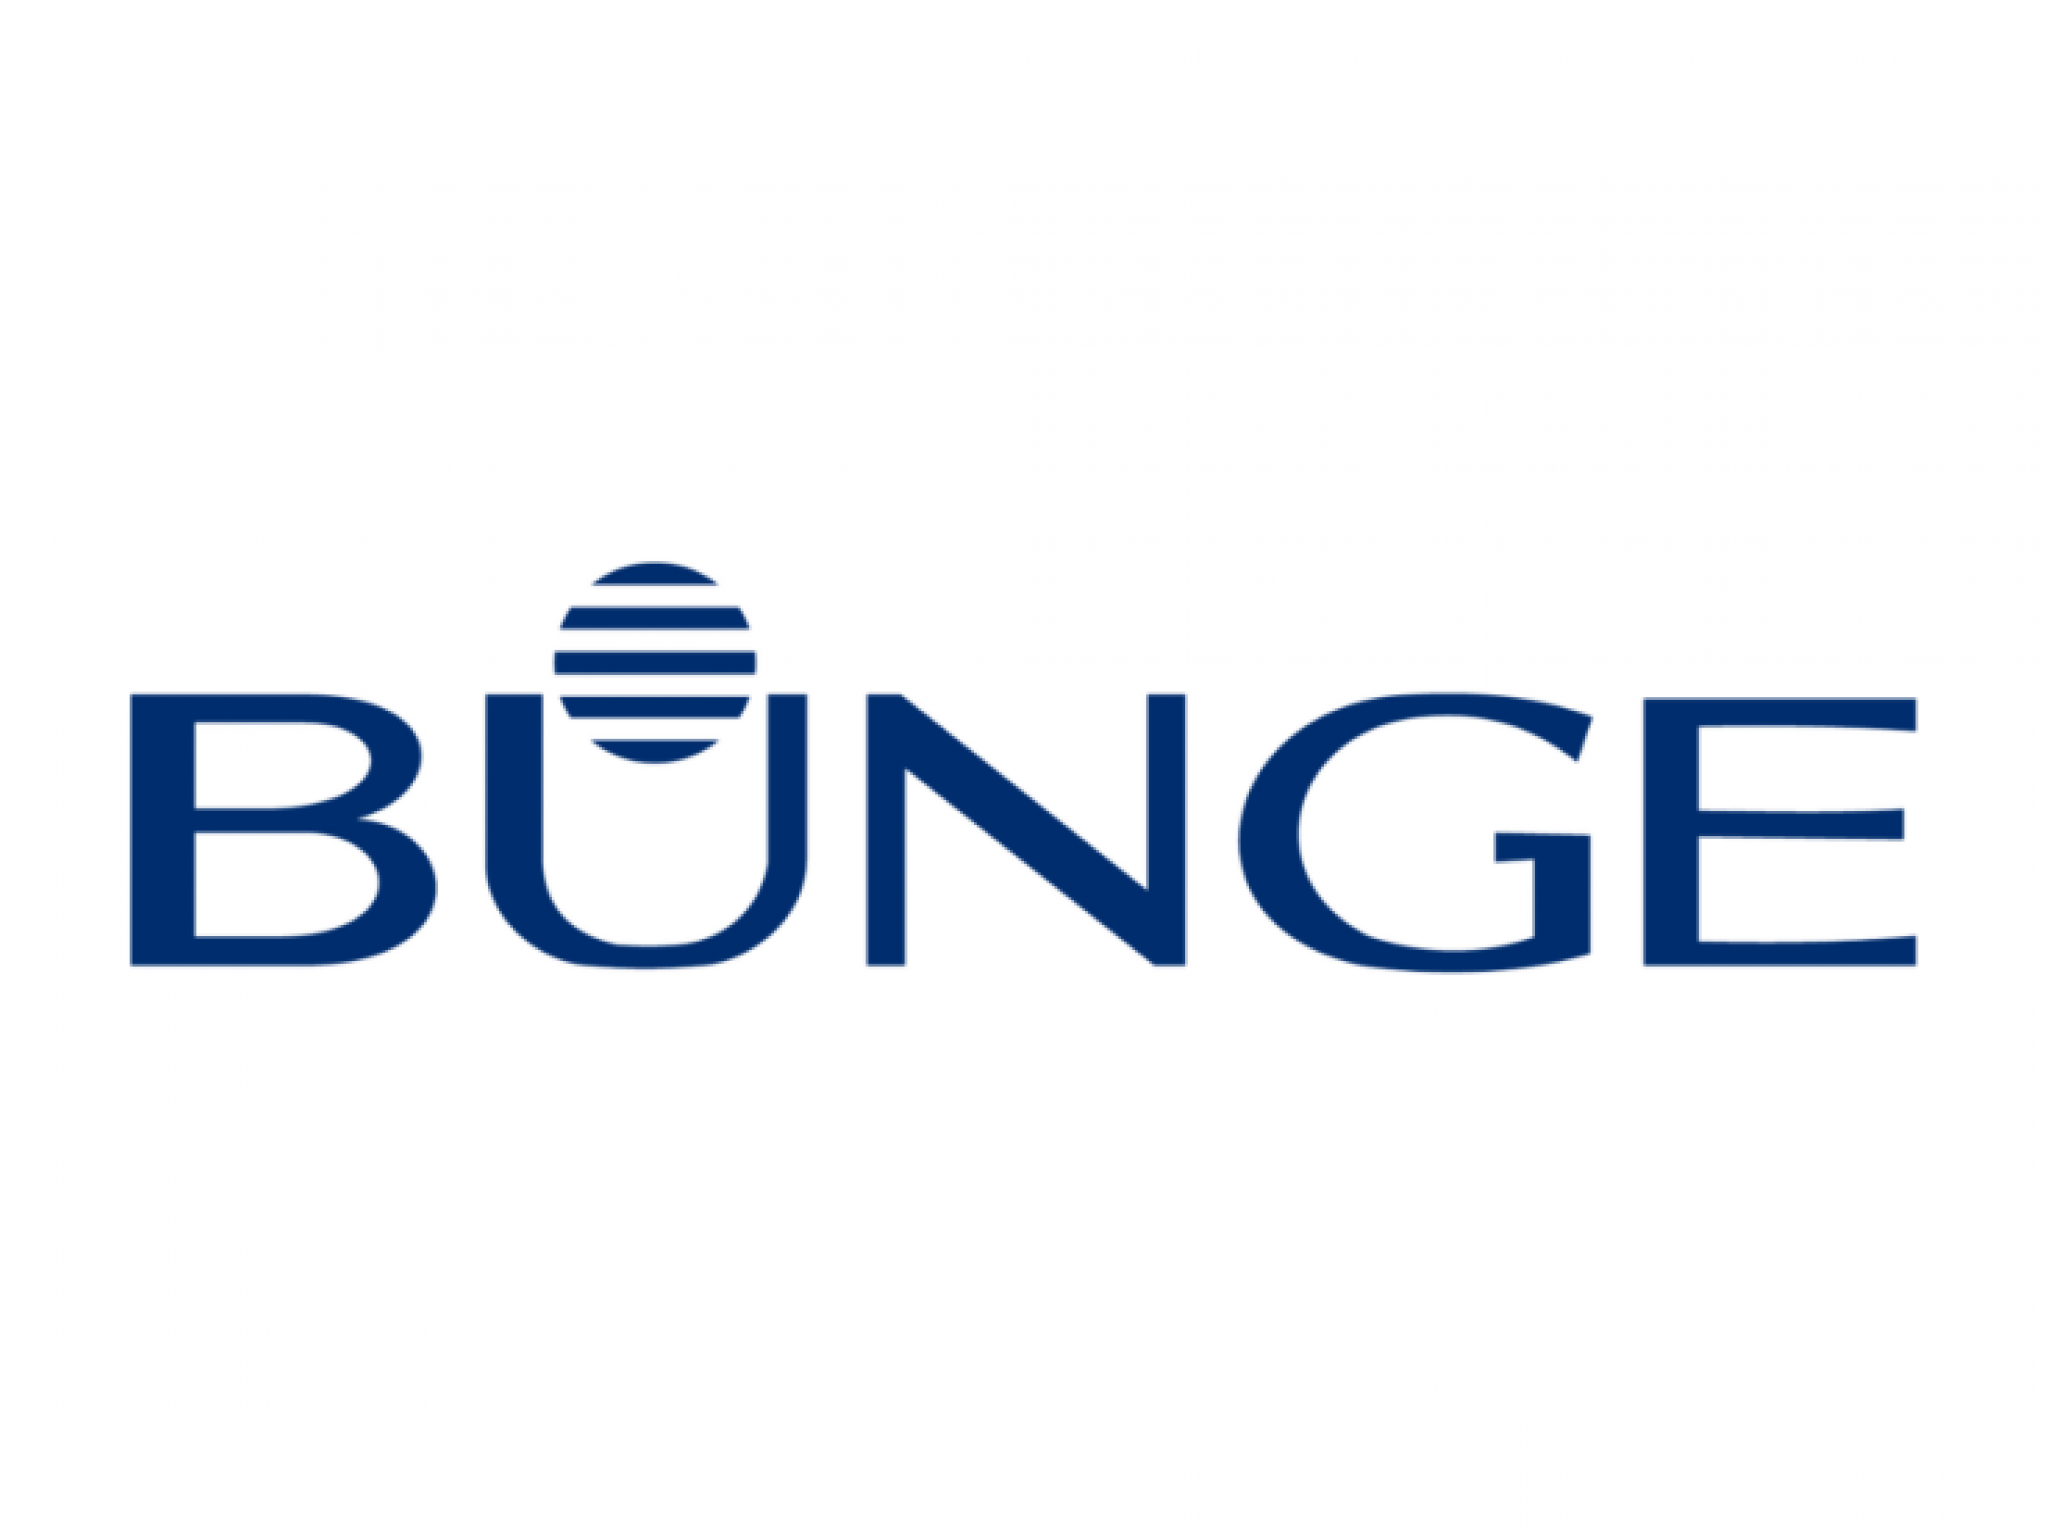  bunge-shares-tumble-over-6-after-q2-miss-ceo-highlights-strategic-moves-amid-cash-flow-concerns 